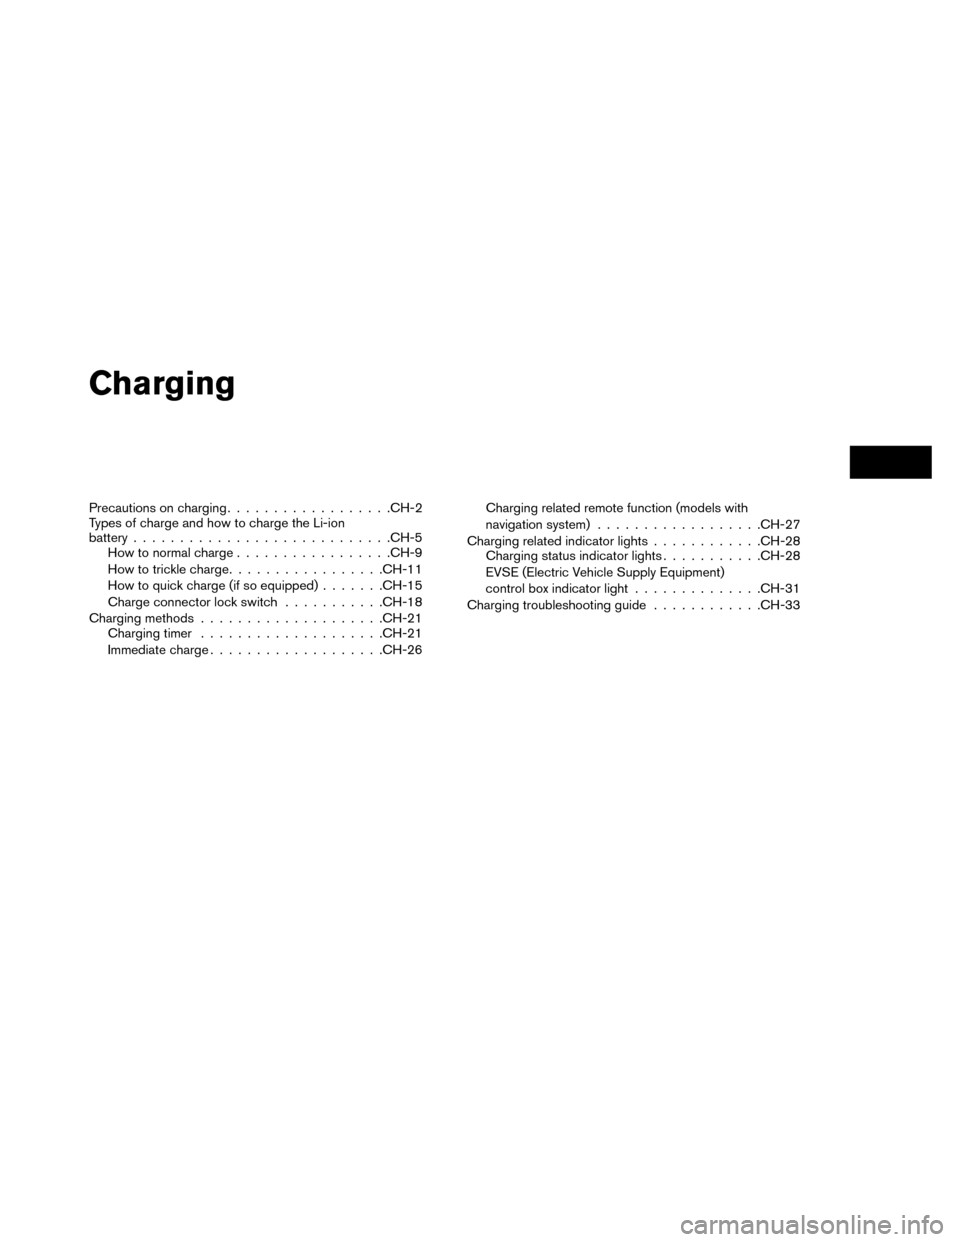 NISSAN LEAF 2015 1.G Workshop Manual Charging
Precautions on charging................. .CH-2
Types of charge and how to charge the Li-ion
battery ........................... .CH-5
How to normal charge ................ .CH-9
How to trickl